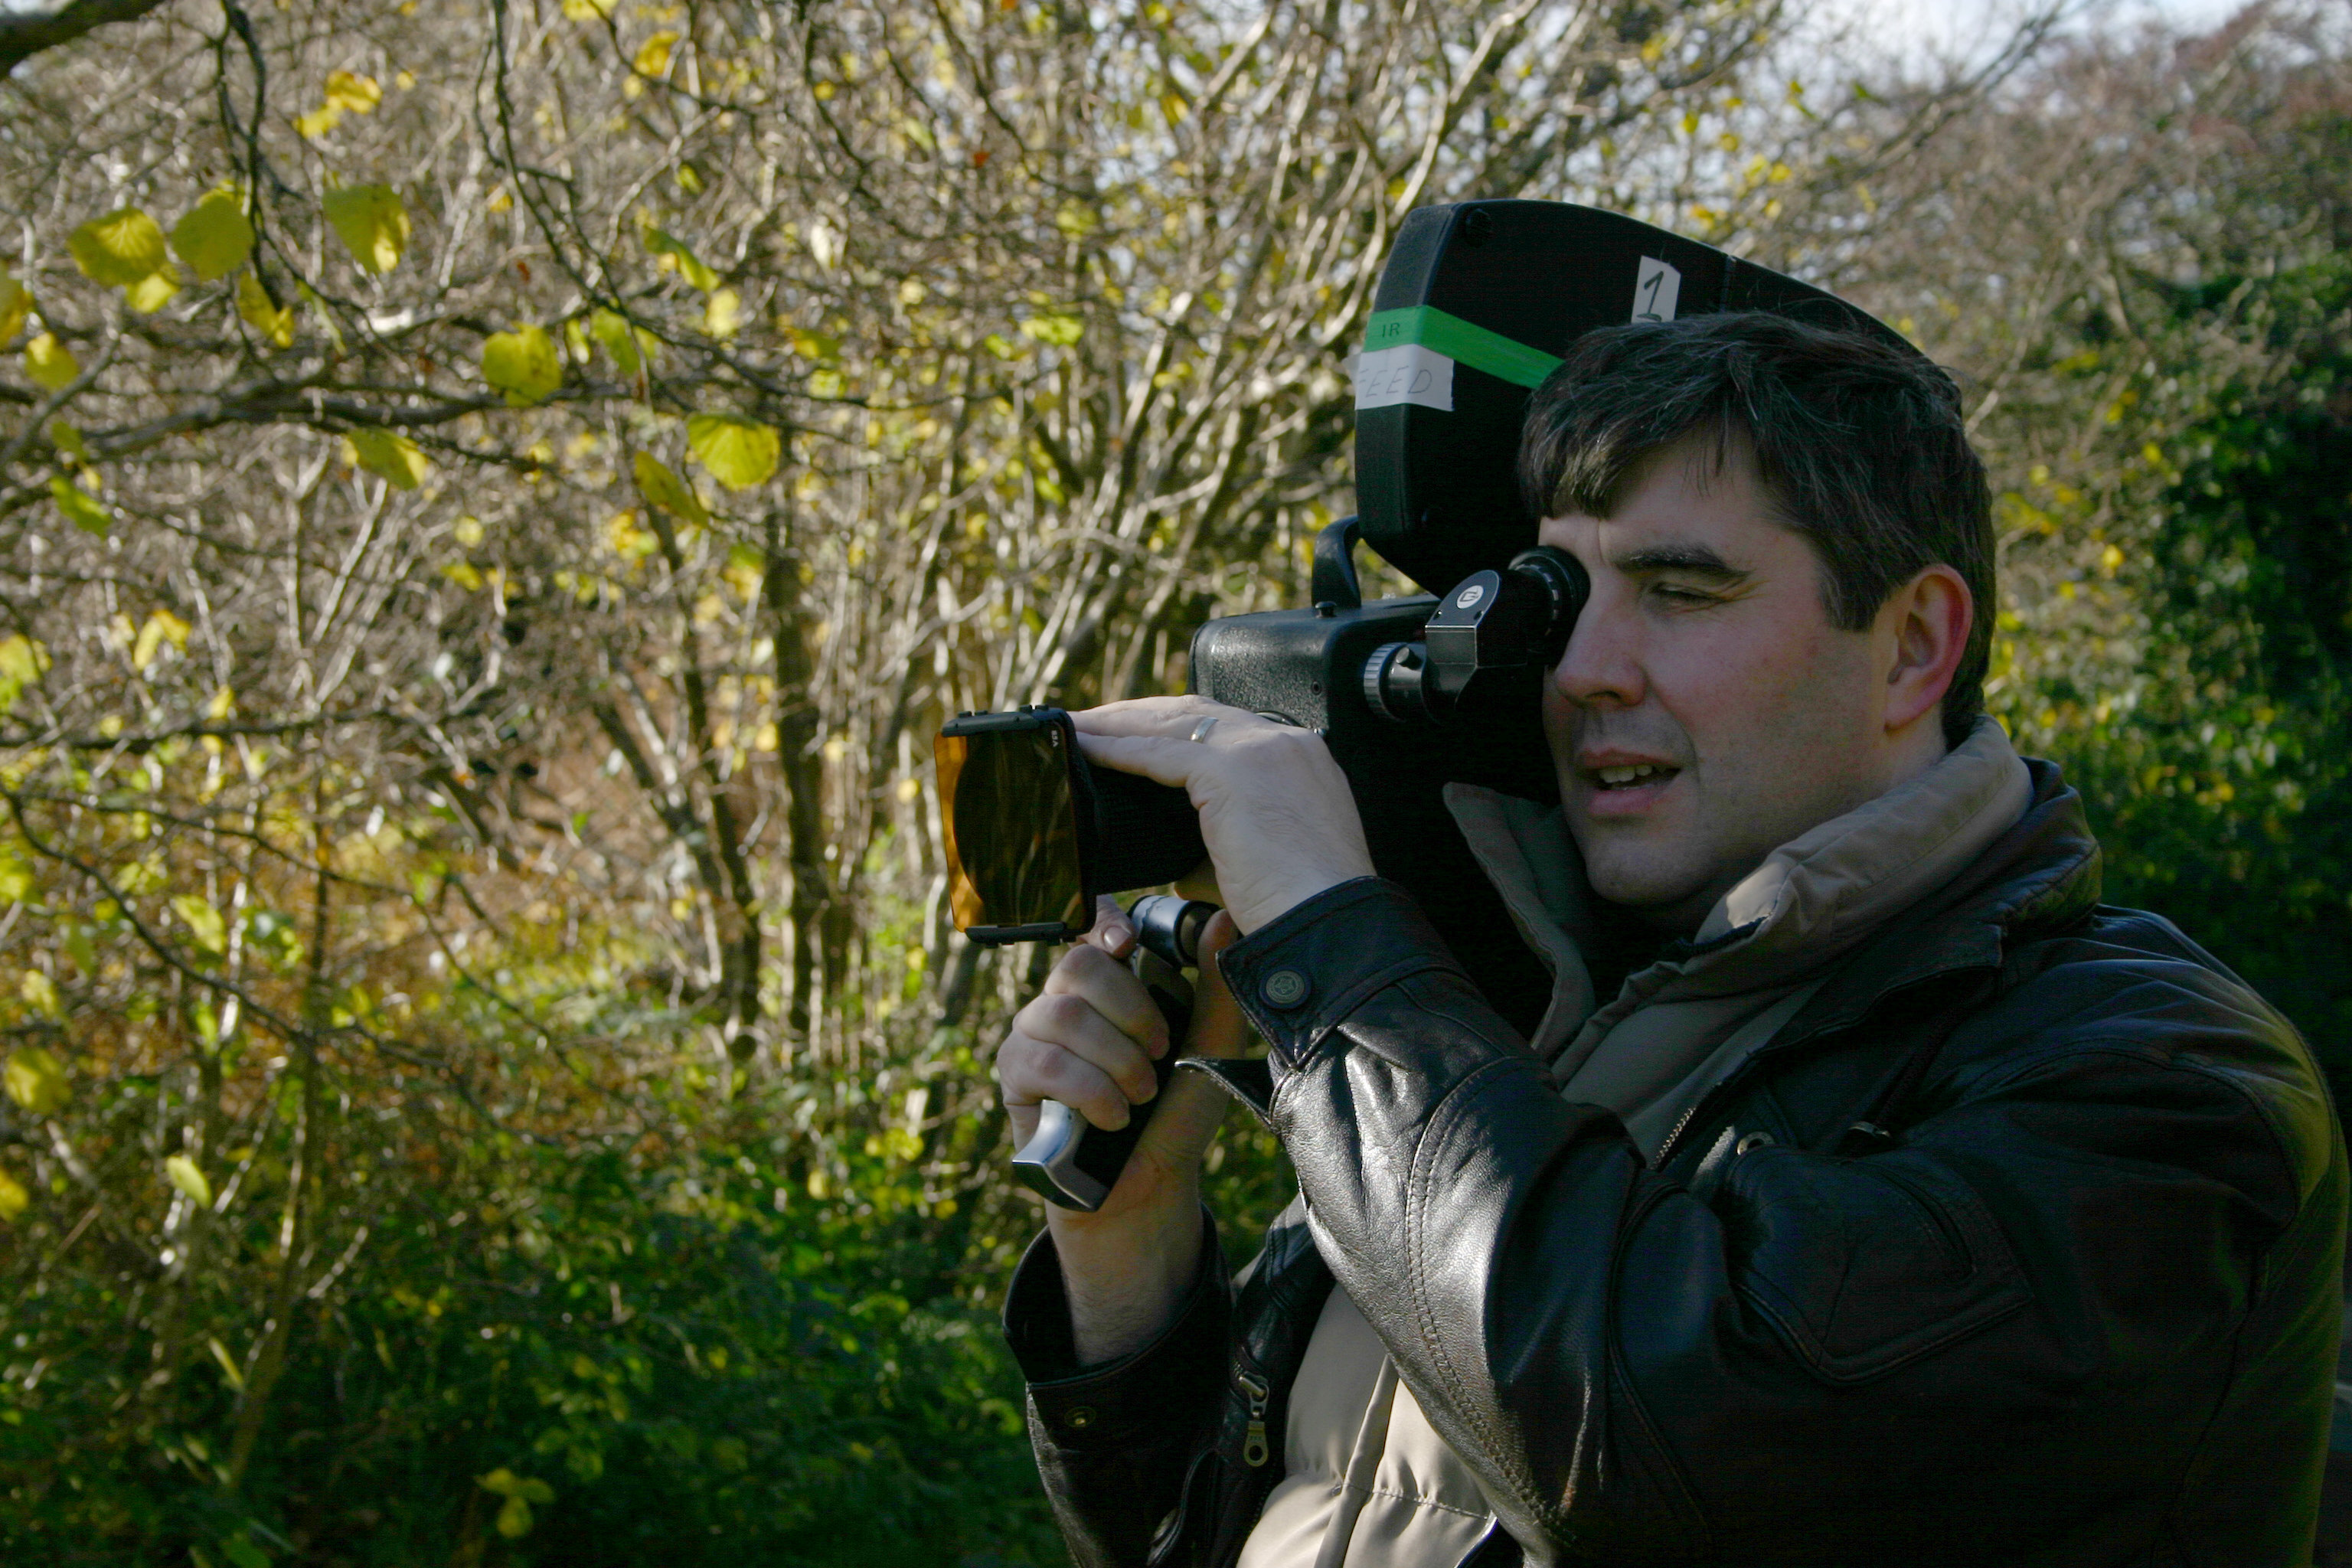 George Kingsnorth (director) test shooting 16mm film for the feature film 'Fiddler's Walk' in March 2005.